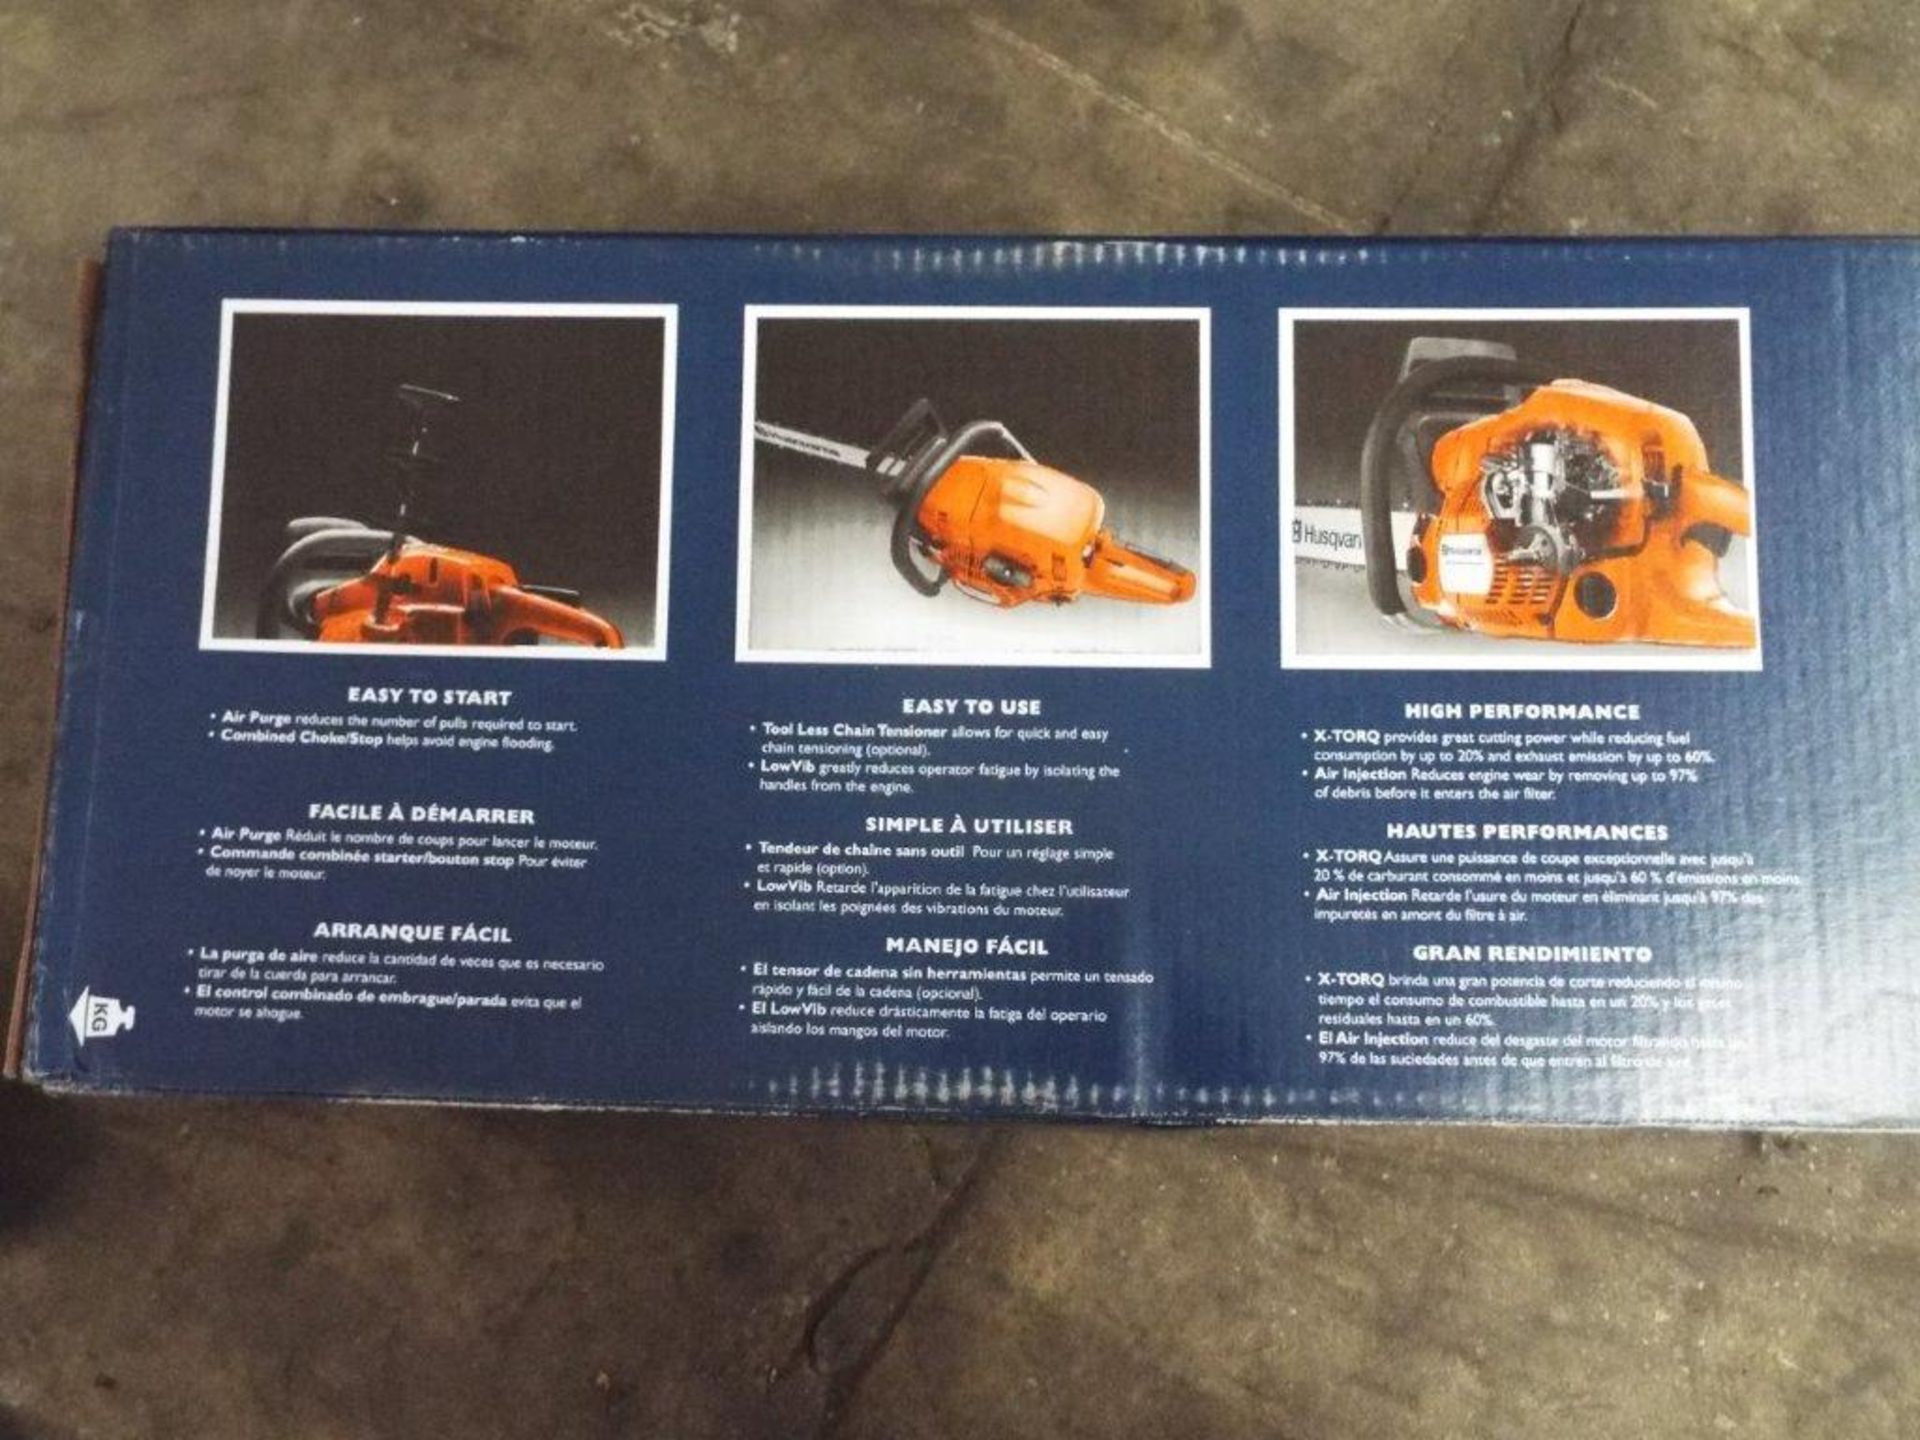 New Unused Husqvarna 240 E-Series Chainsaw with 16" Blade - Image 3 of 9